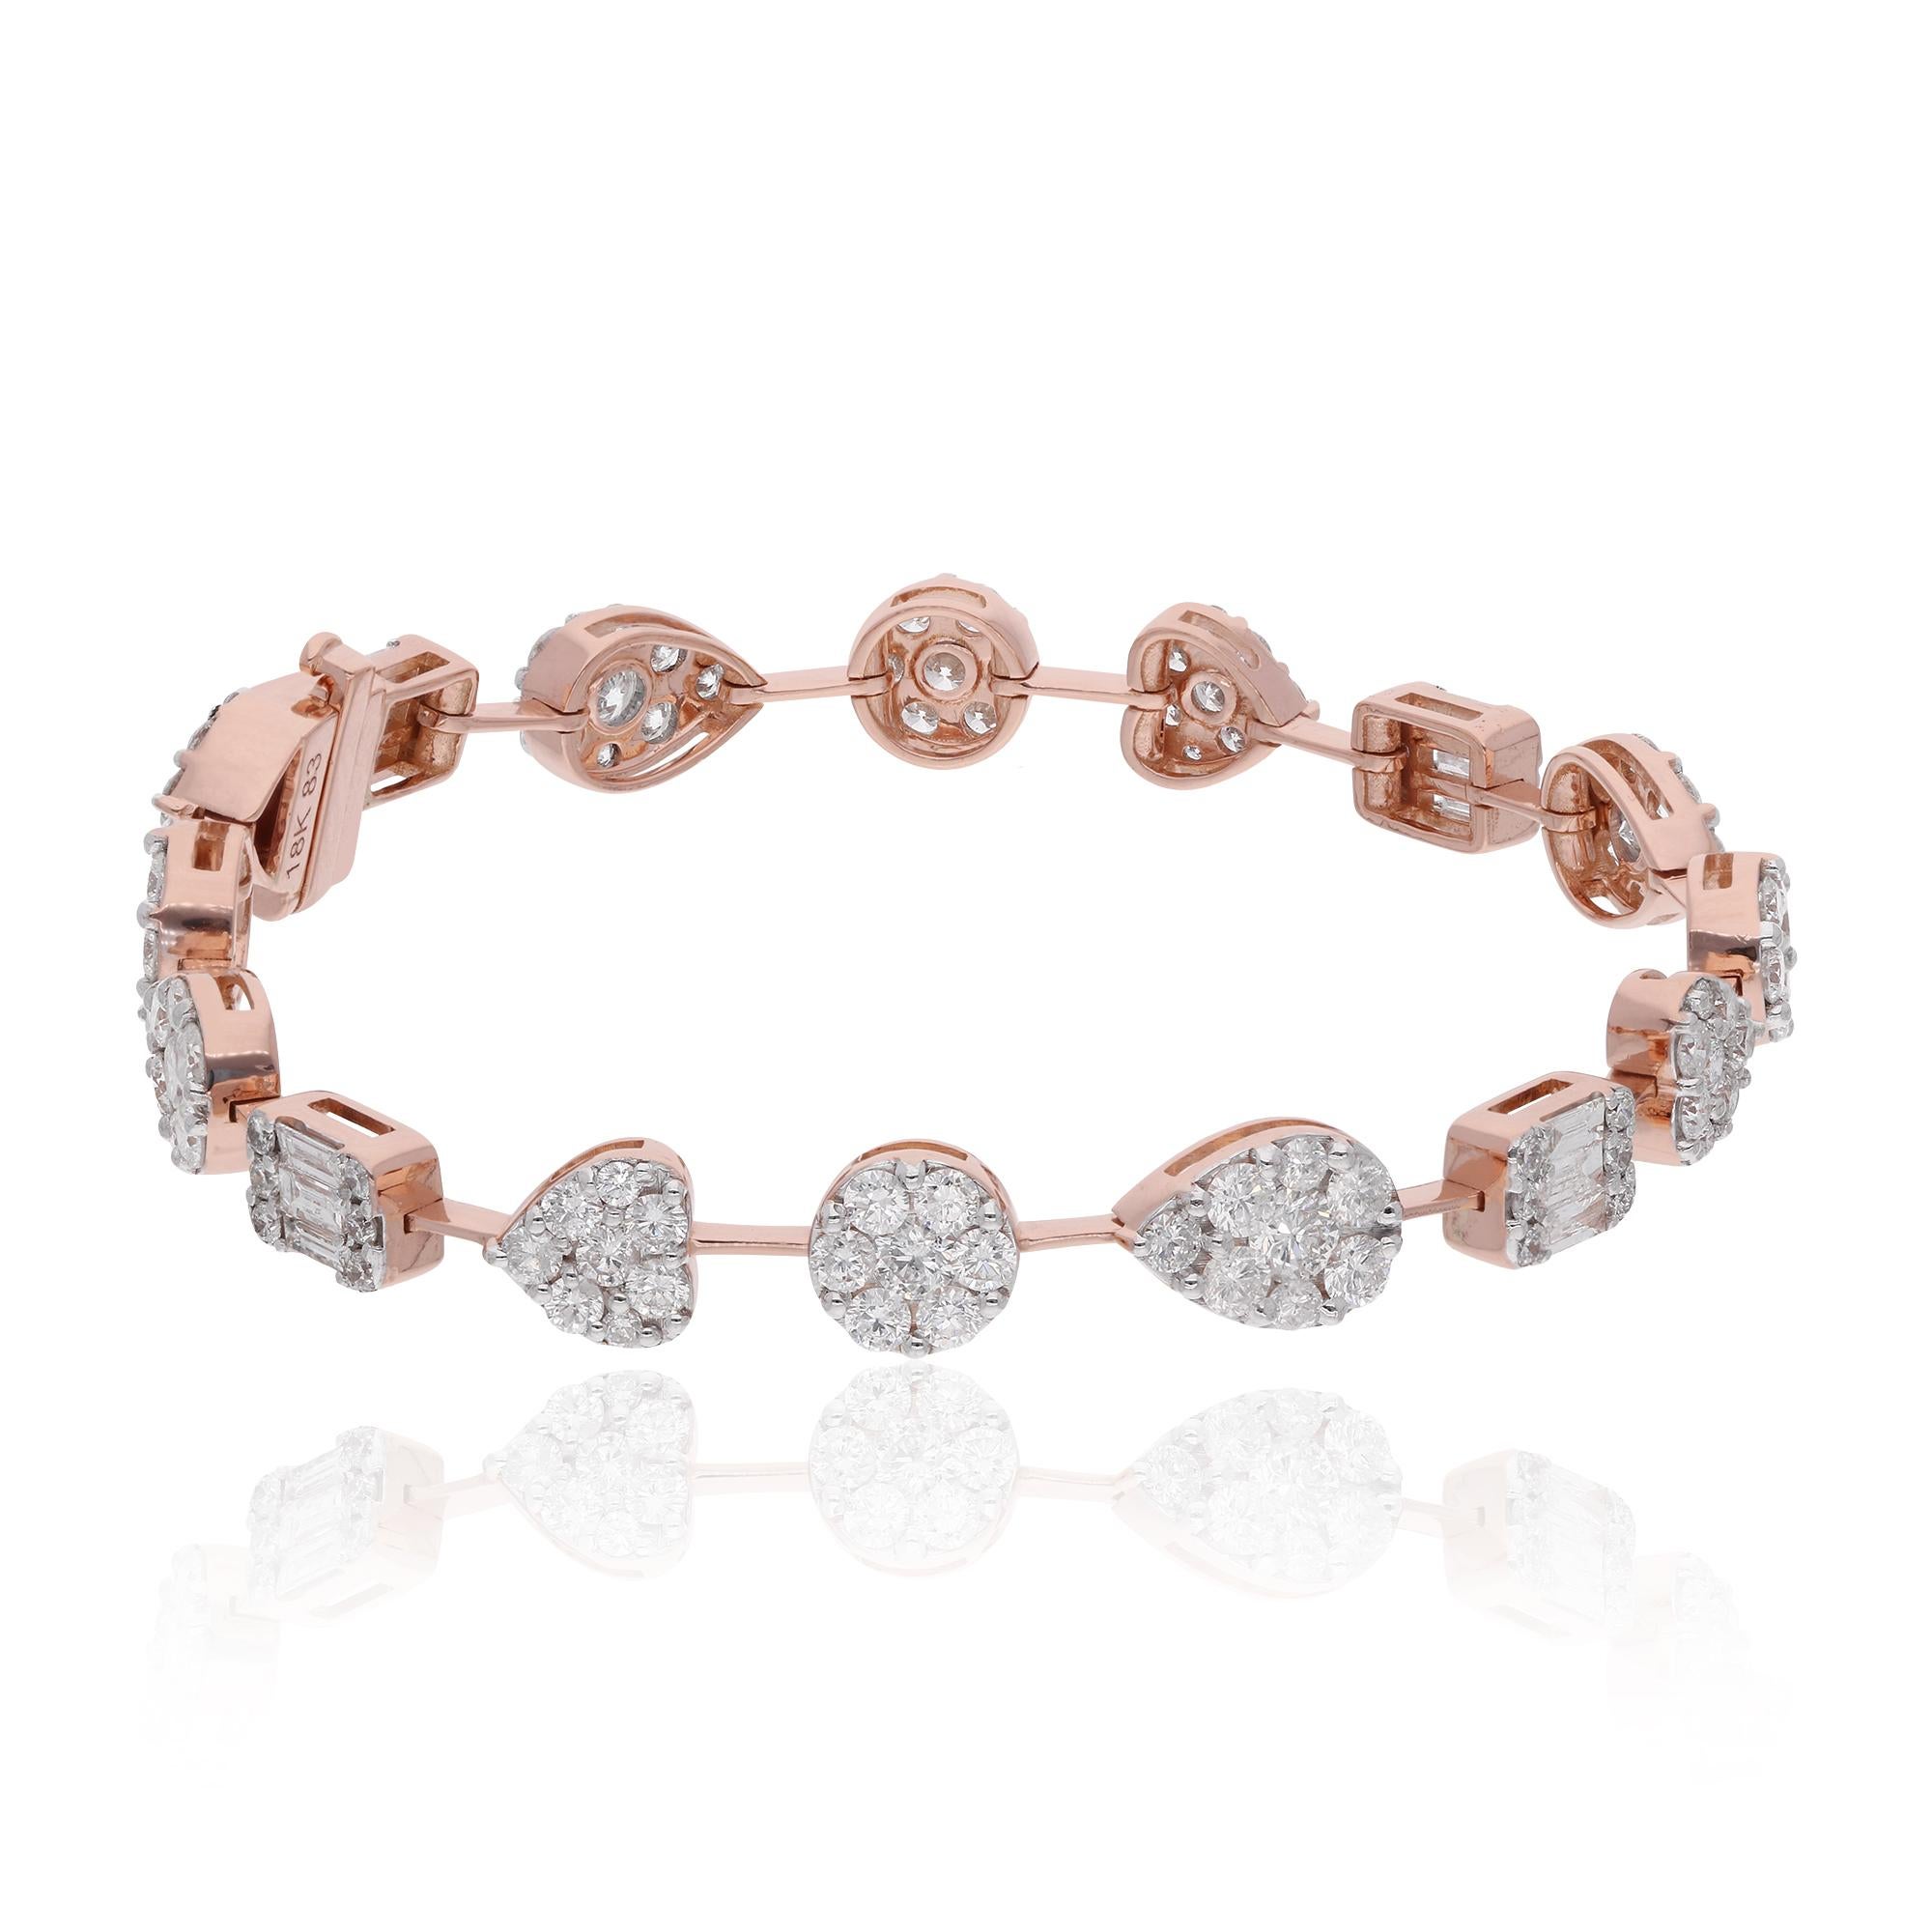 Elevate your style with our exquisite 18k Rose Gold Diamond Bracelet. Dazzling diamond accents are set in luxurious rose gold for a stunning, sophisticated look. Perfect for special occasions or as a gift for a loved one. Make a statement with this